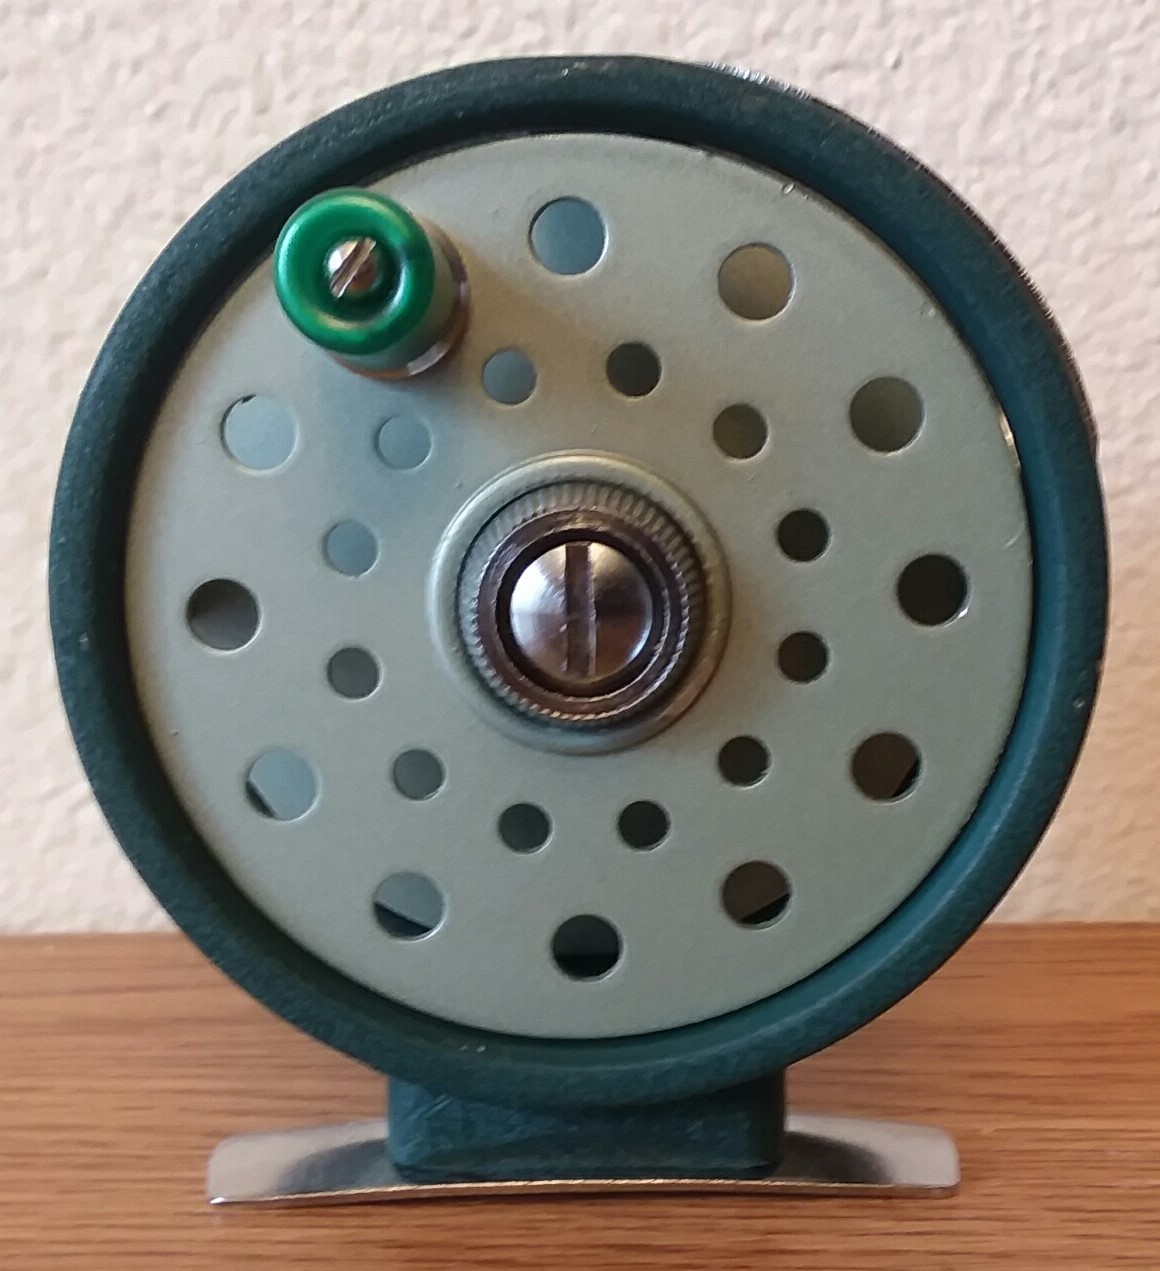 Taico Automatic Fly Fishing Reel Vintage Made in Japan , EC